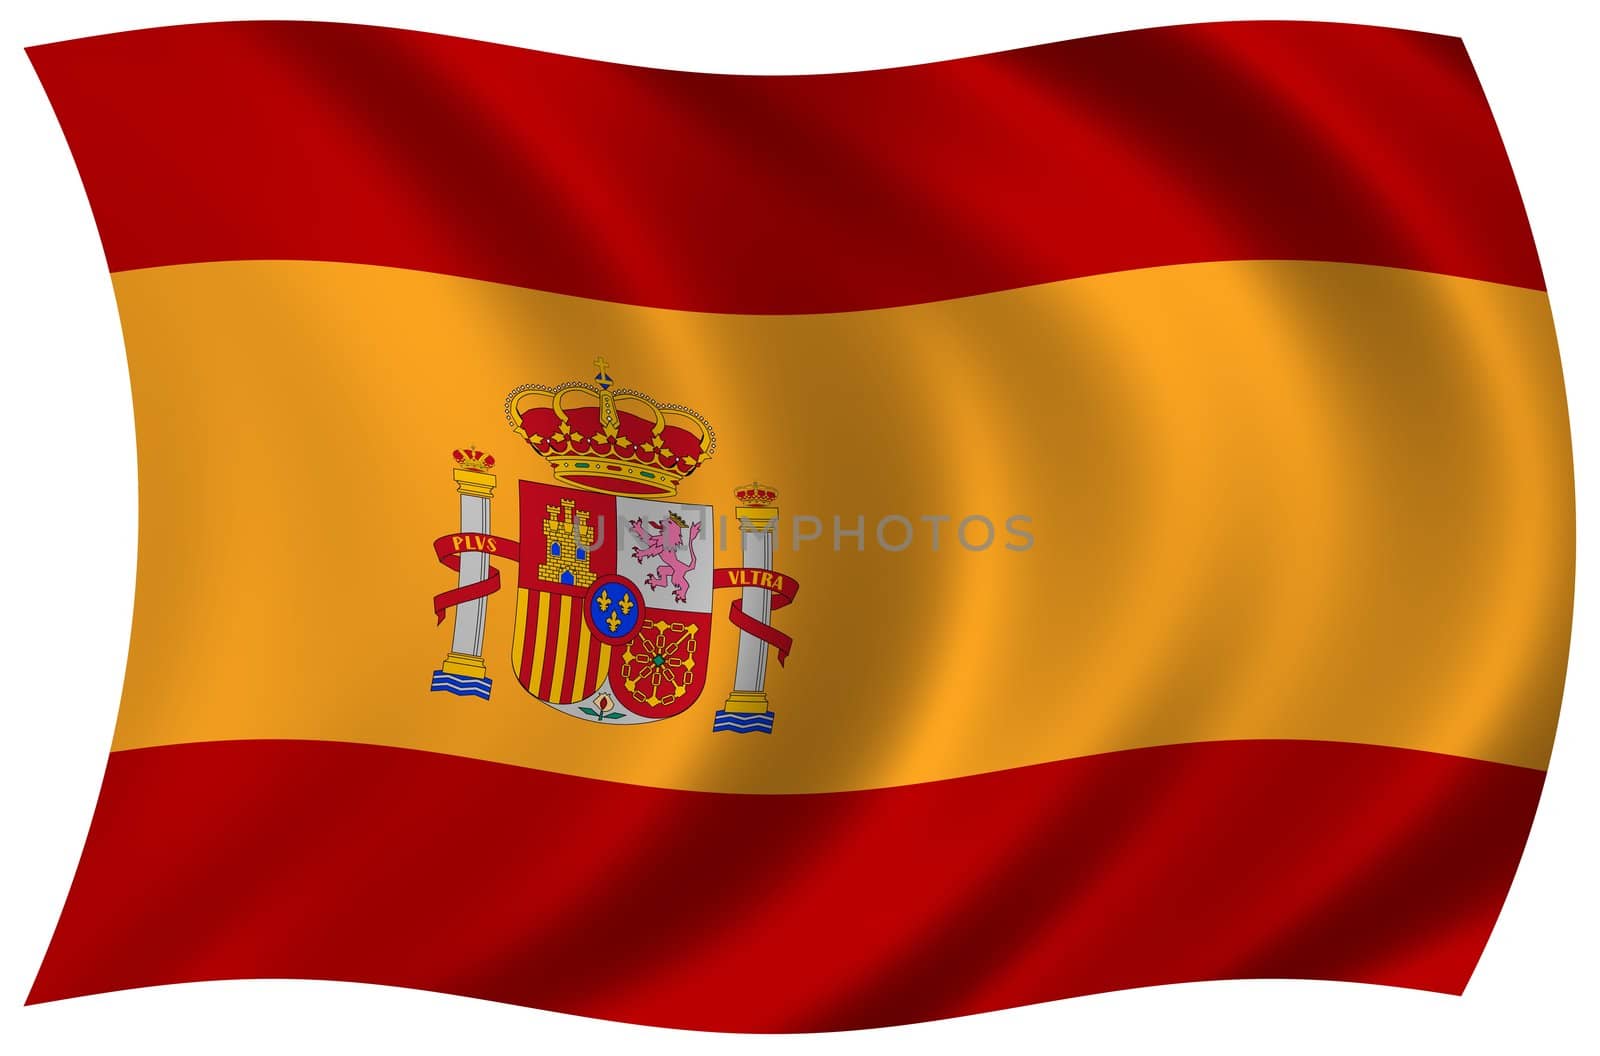 Flag of Spain by peromarketing